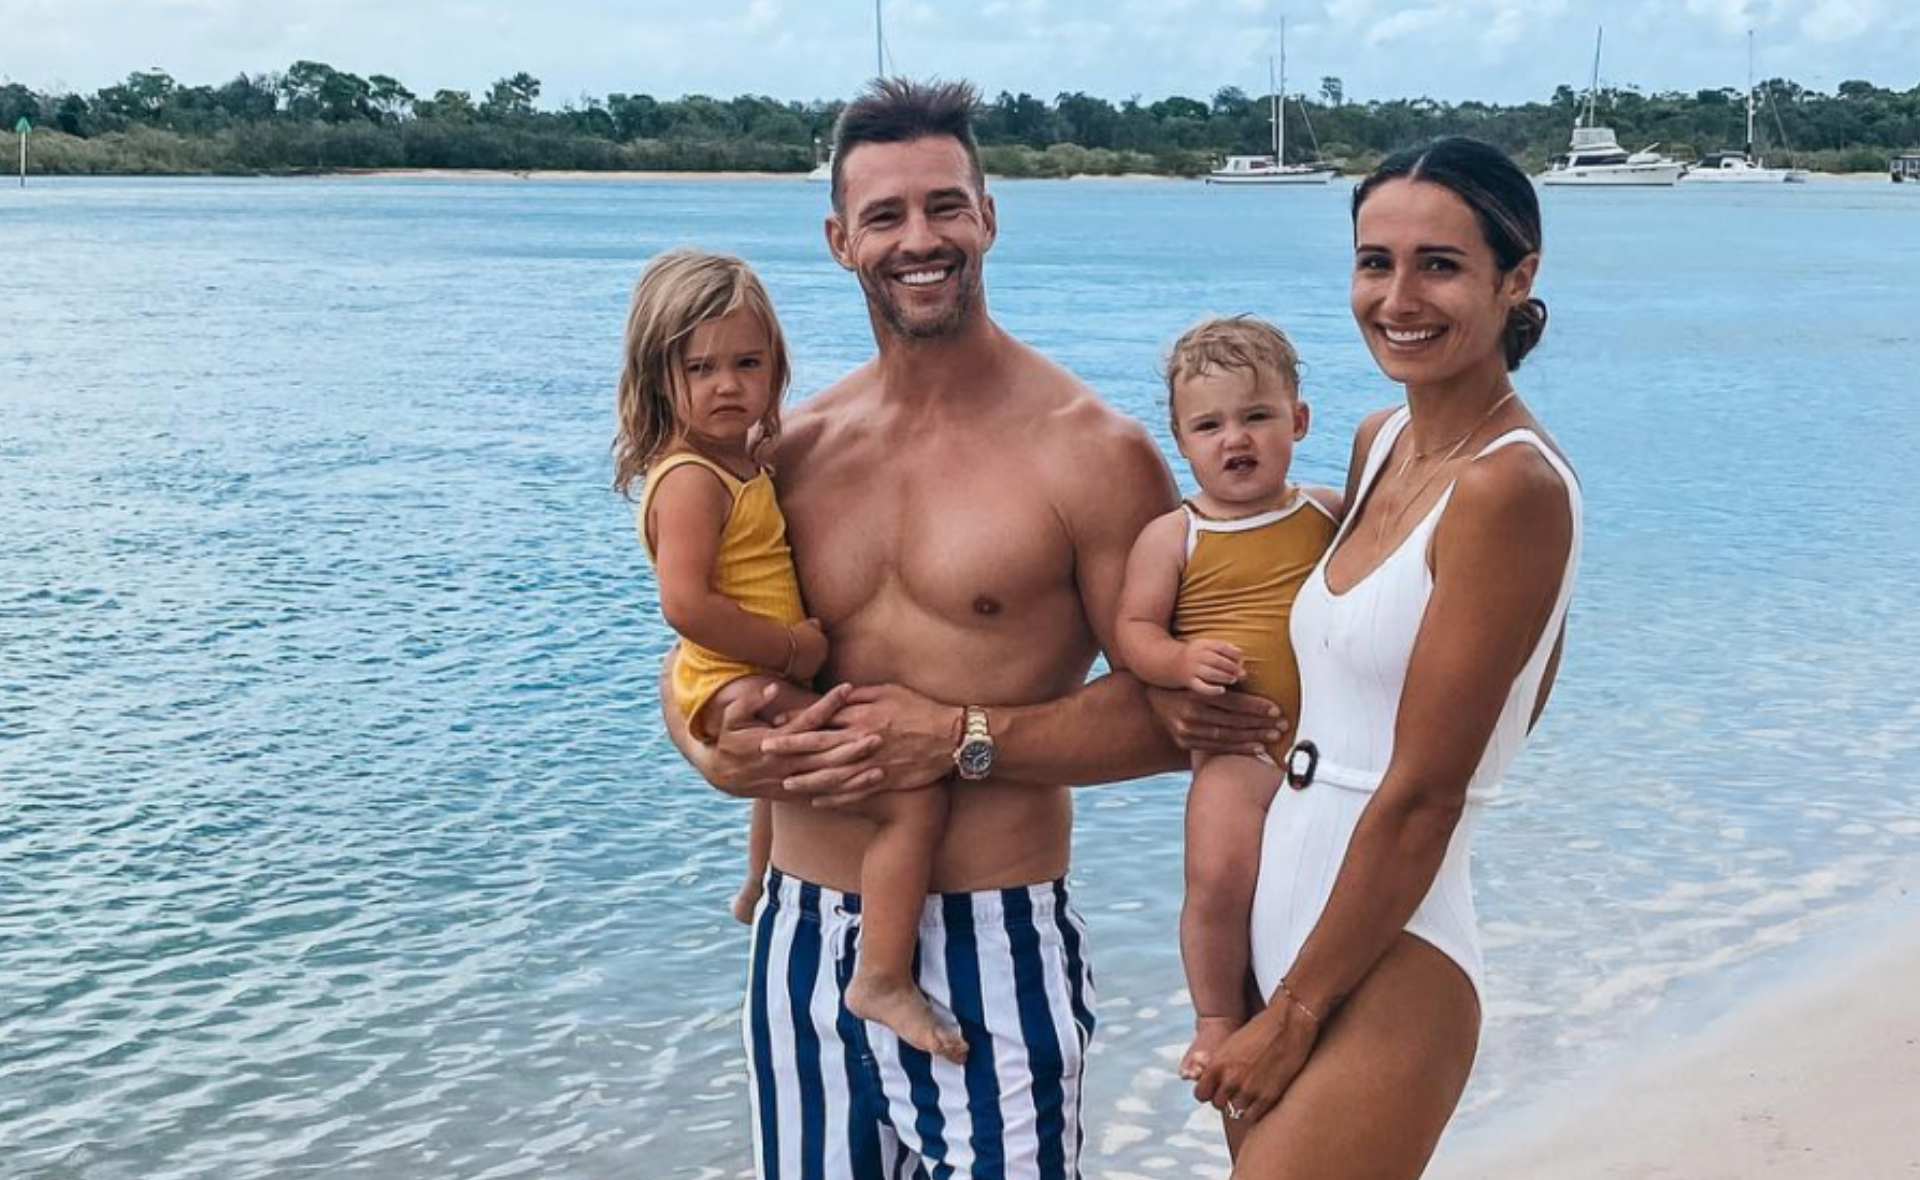 Talk about genetically blessed! Kris Smith and Sarah Boulazeris’ cutest family moments captured on camera